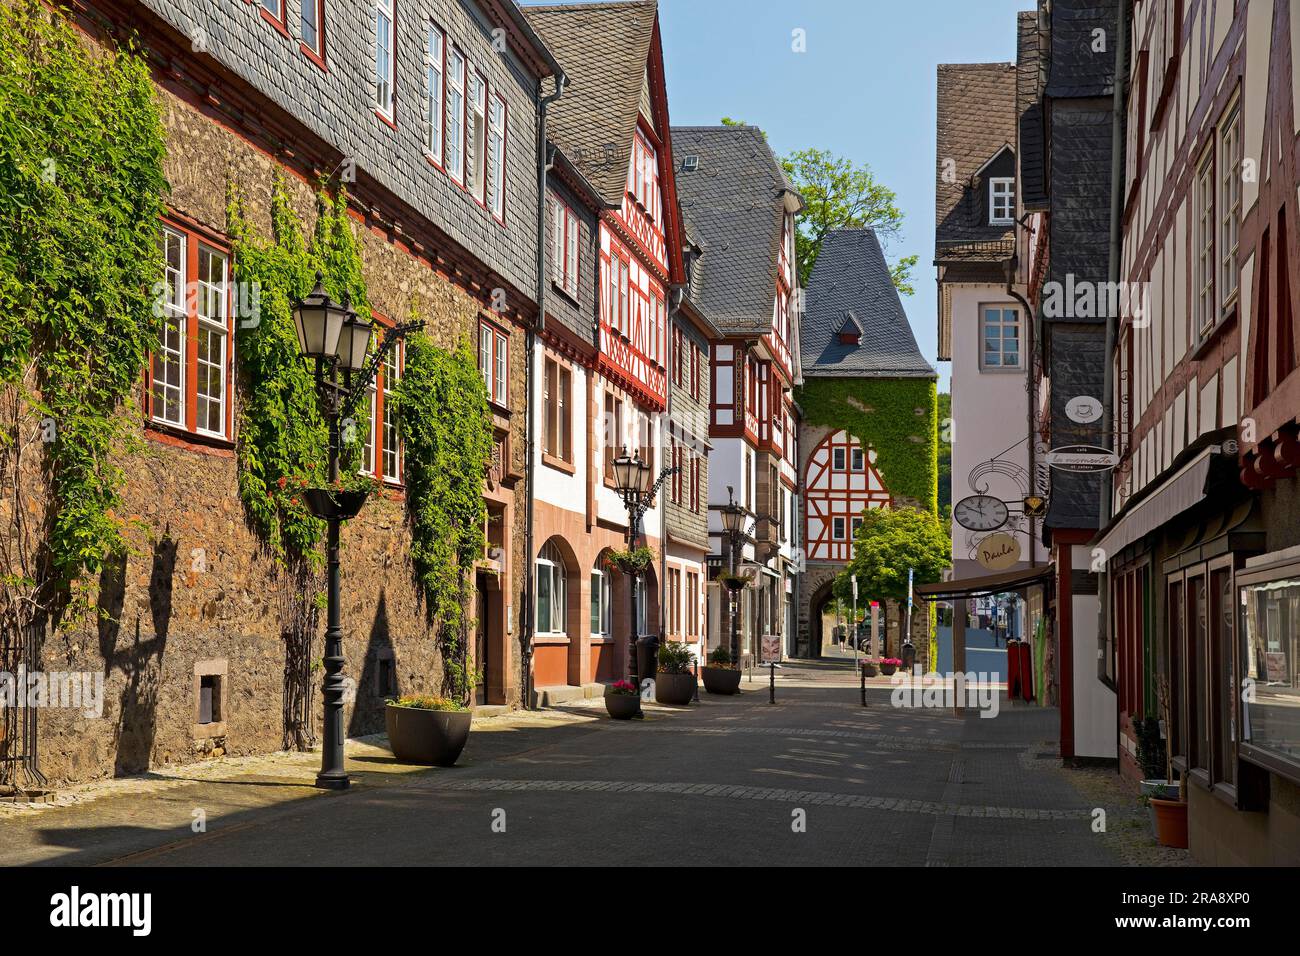 Town hall with half-timbered houses and Leonhard tower, town gate, historic old town, Deutsche Fachwerkstrasse, Herborn, Hesse, Germany Stock Photo